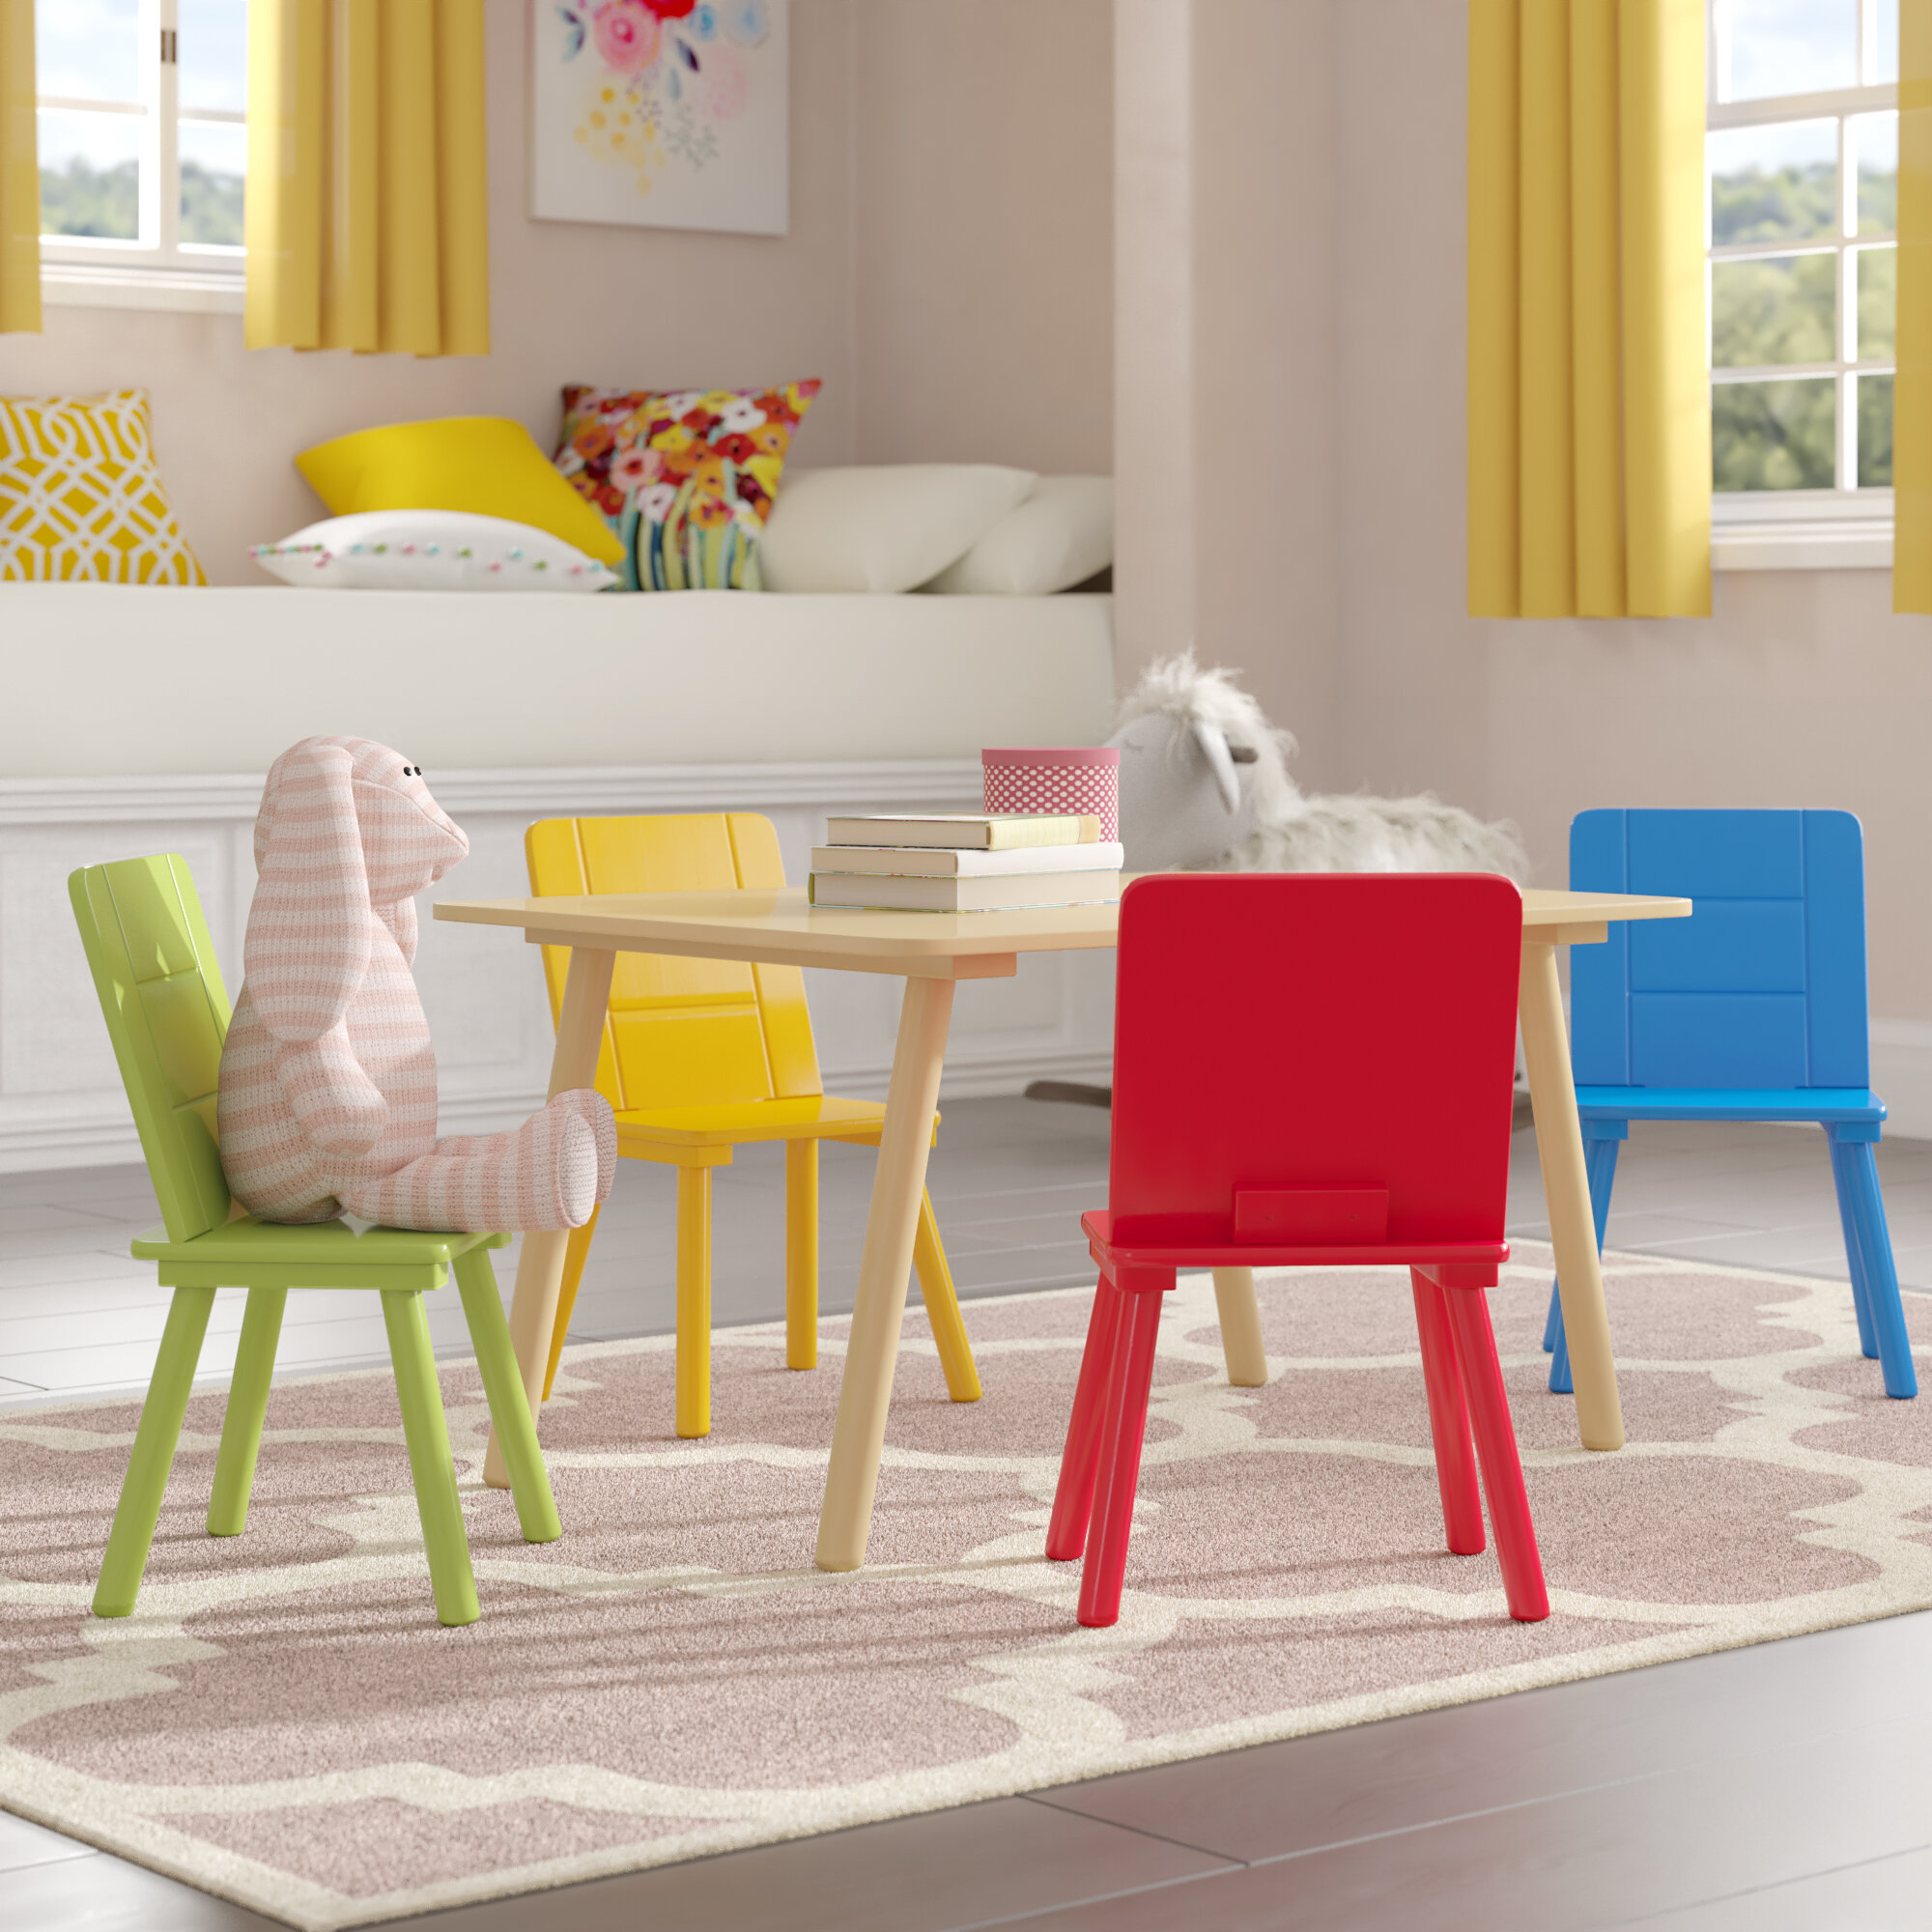 Greensen Kids Table And Chair Set Wood Table And Chairs For Kids Toddler Child Table And Chair Little Girls Table Set For Playing Learning Painting Eating In Bedroom Playroom Kindergarten Furniture Table